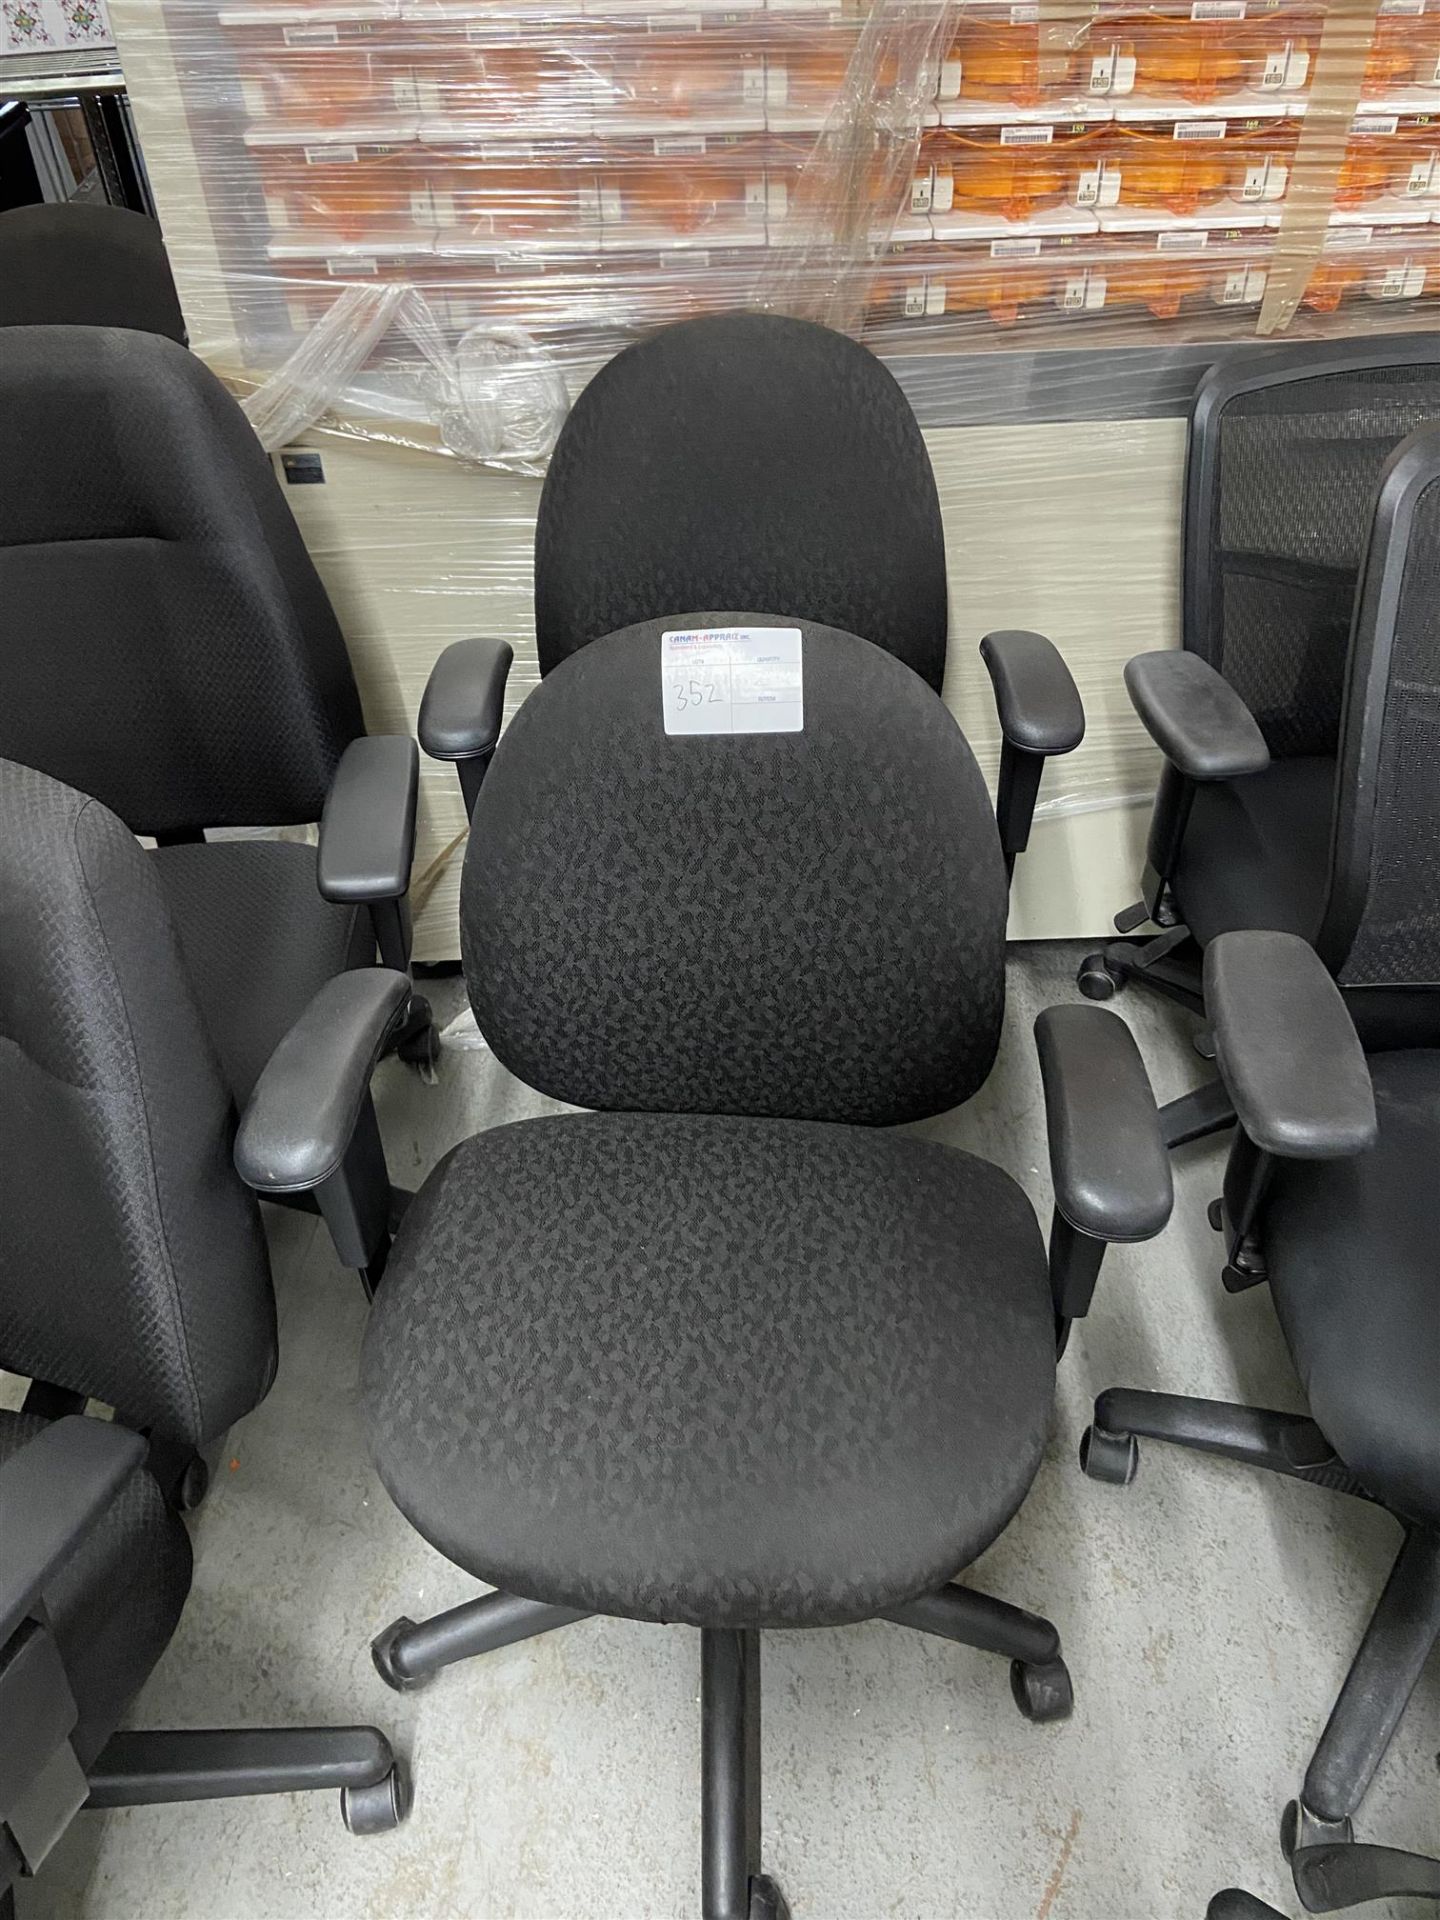 BLACK SPOTTED OFFICE ROLLING CHAIR W/ ARMS - 2PCS